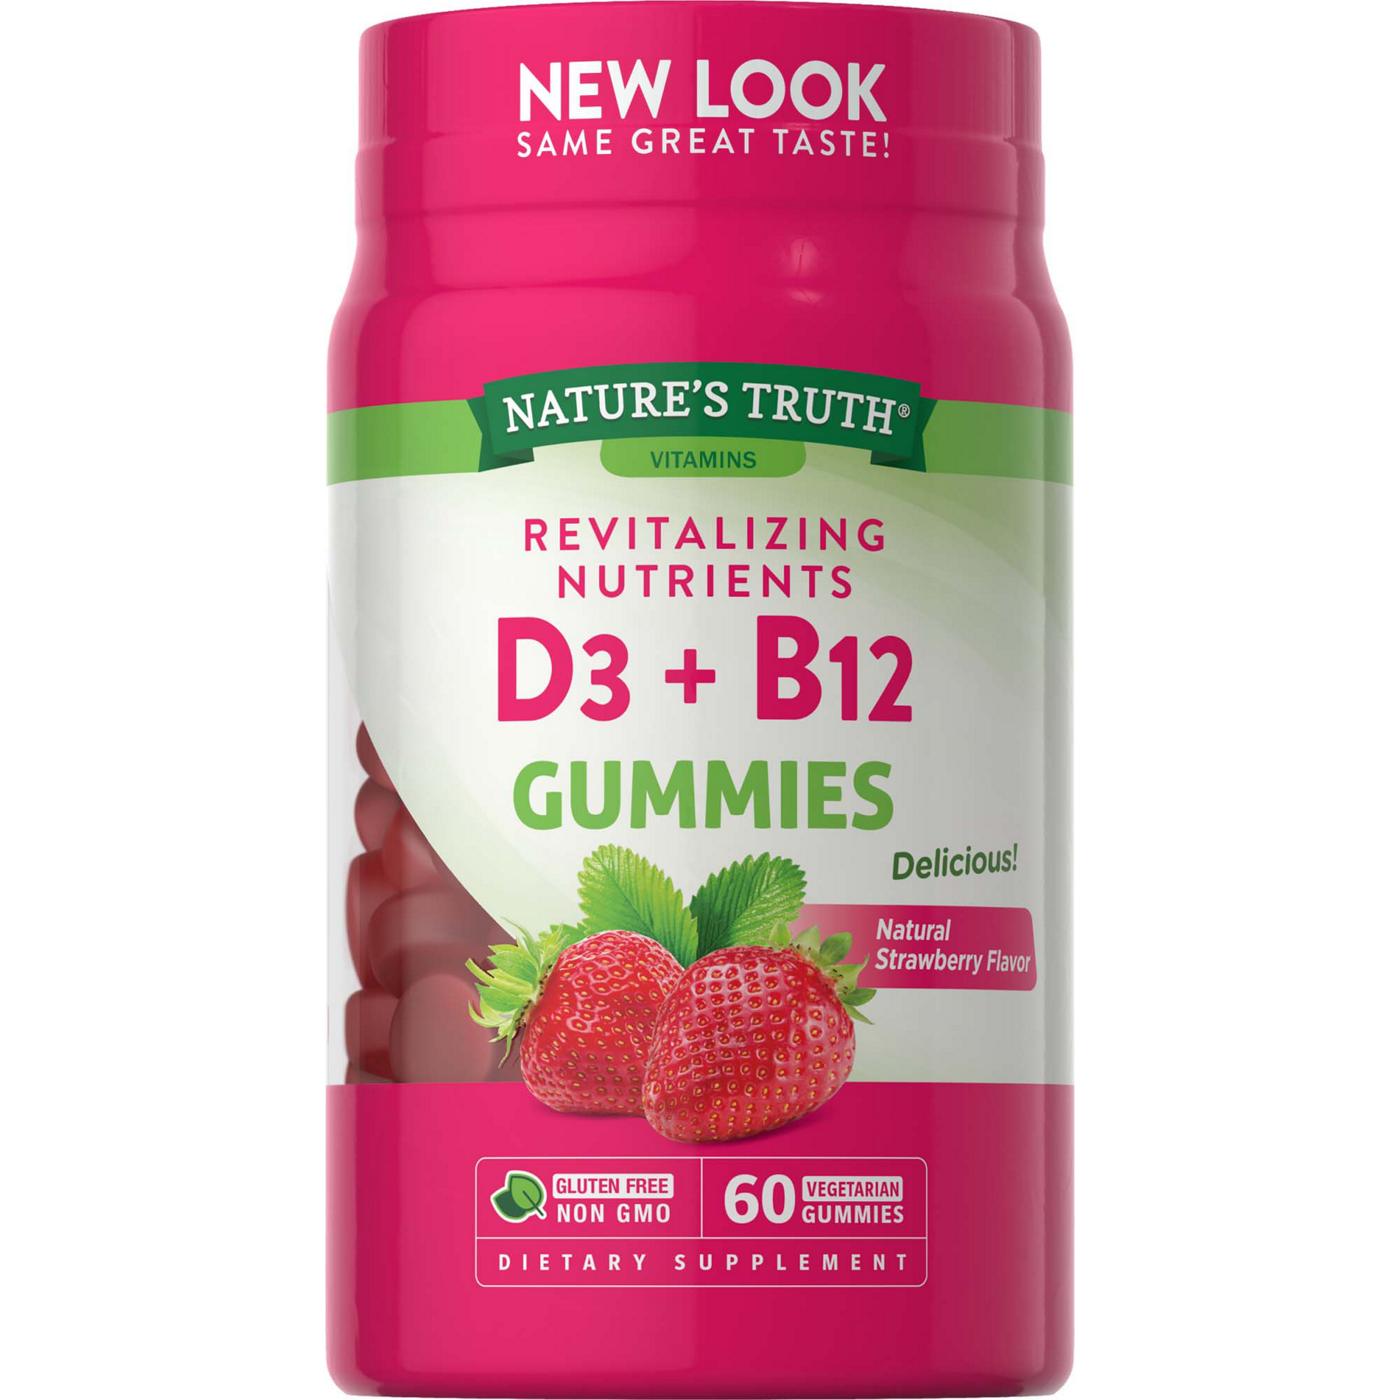 Nature's Truth Vitamins Revitalizing Nutrients D3 + B12 Gummies; image 1 of 4